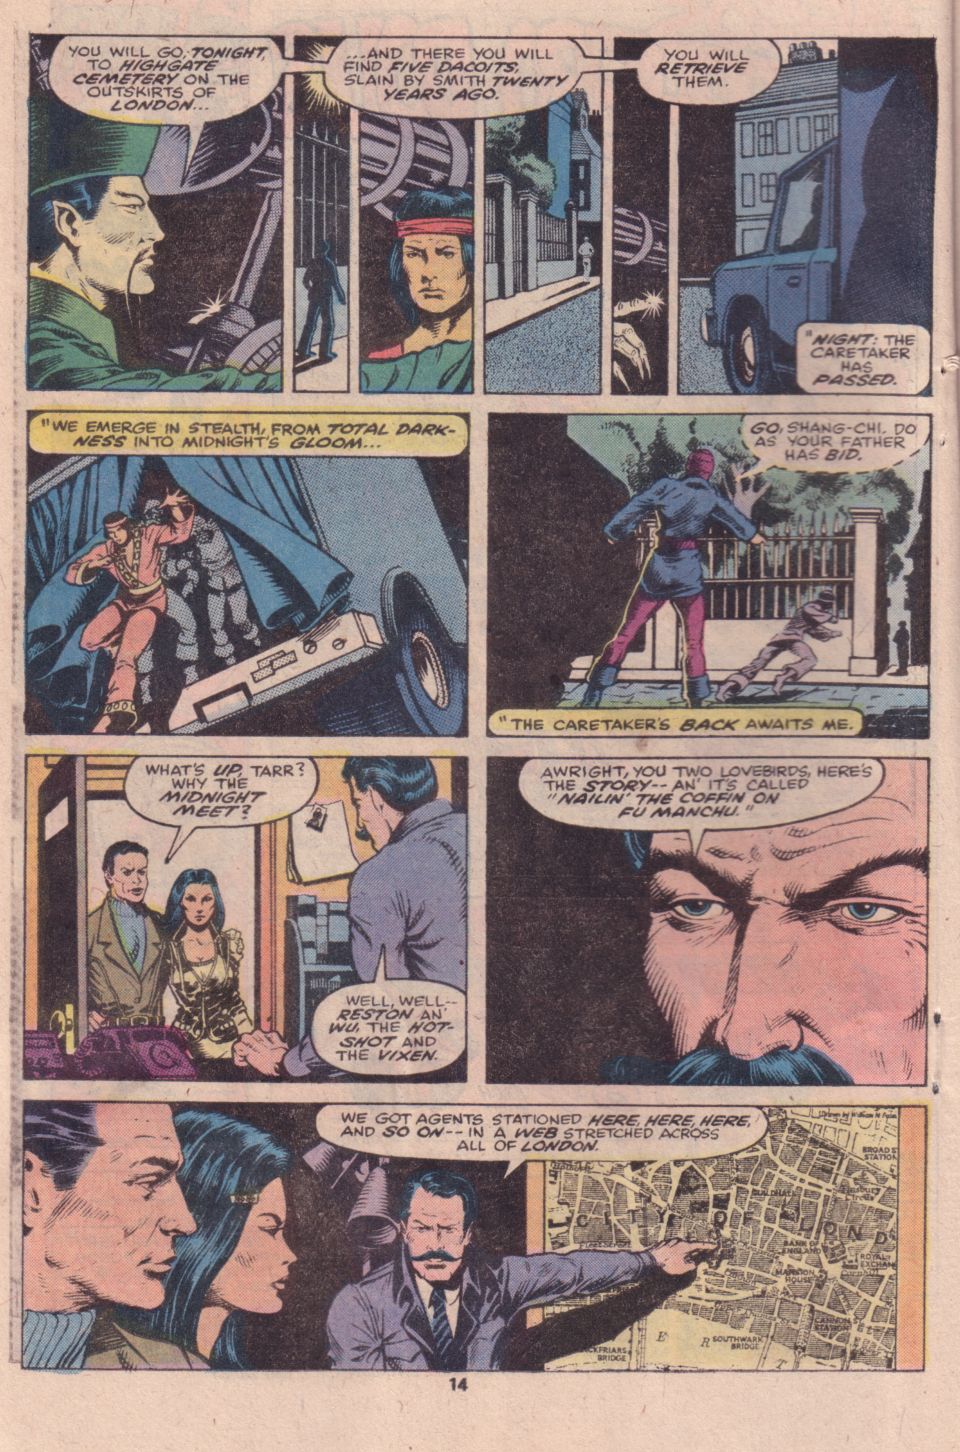 What If? (1977) issue 16 - Shang Chi Master of Kung Fu fought on The side of Fu Manchu - Page 11